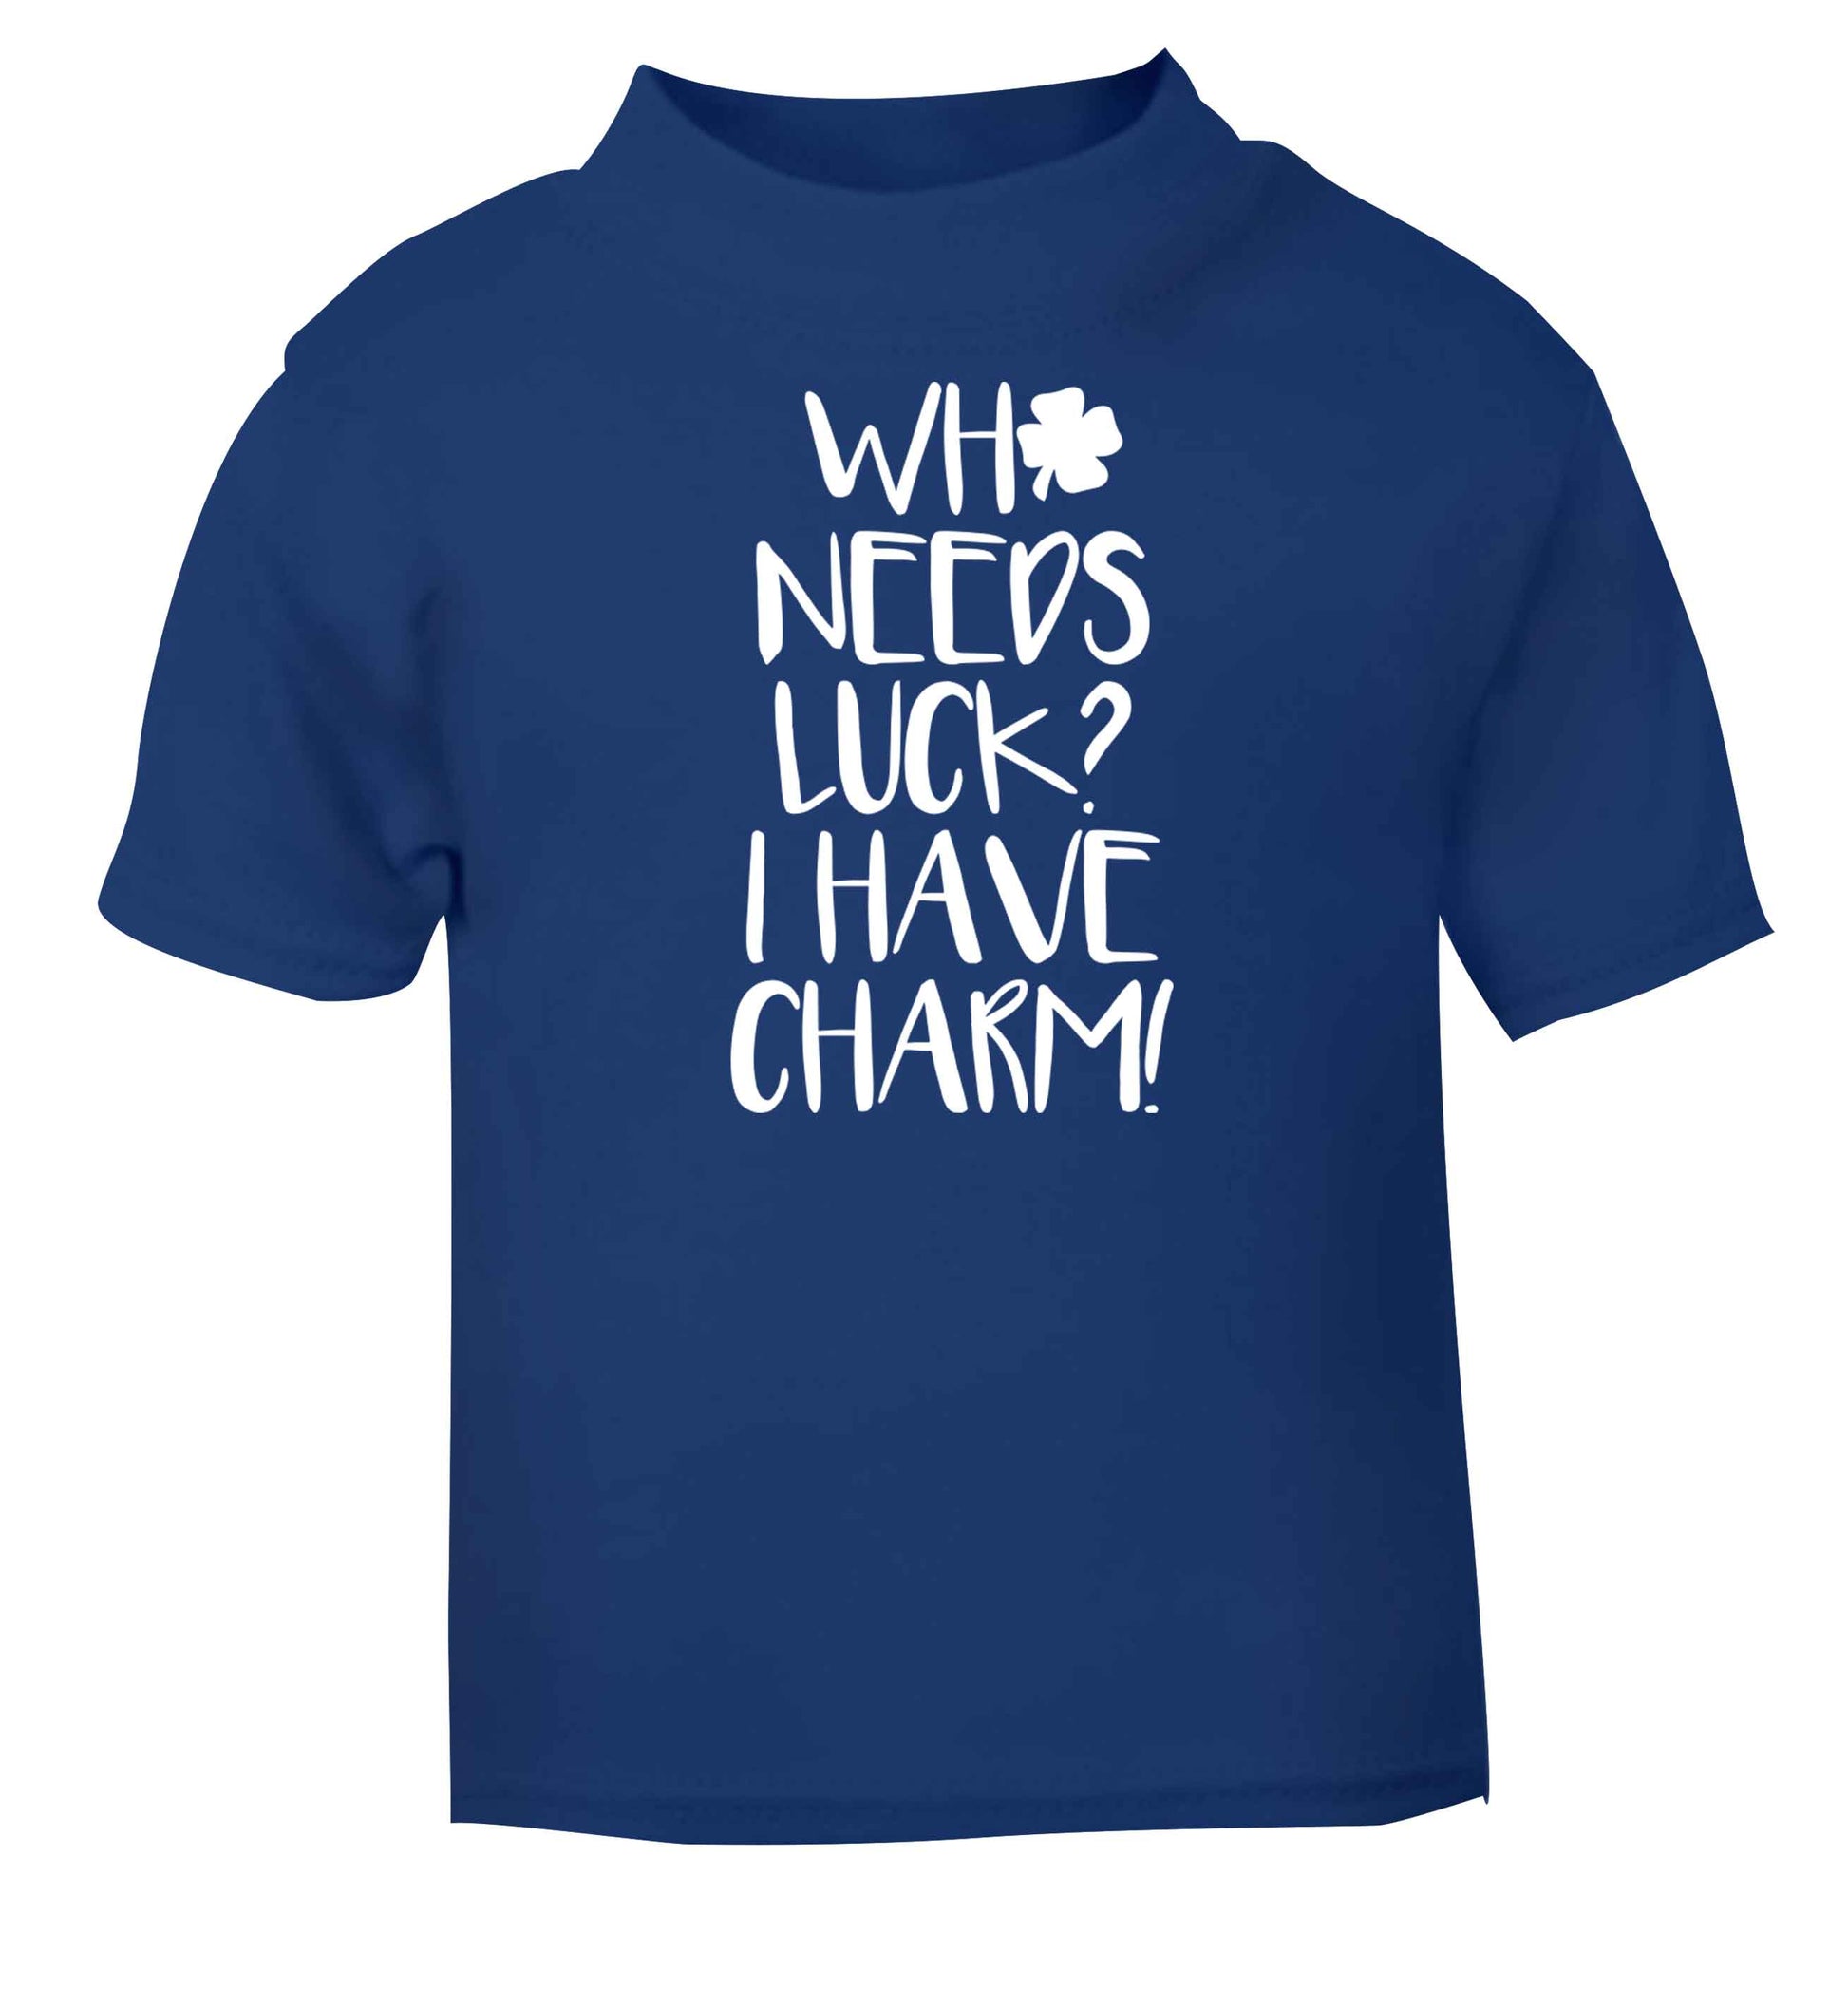 Who needs luck? I have charm! blue baby toddler Tshirt 2 Years